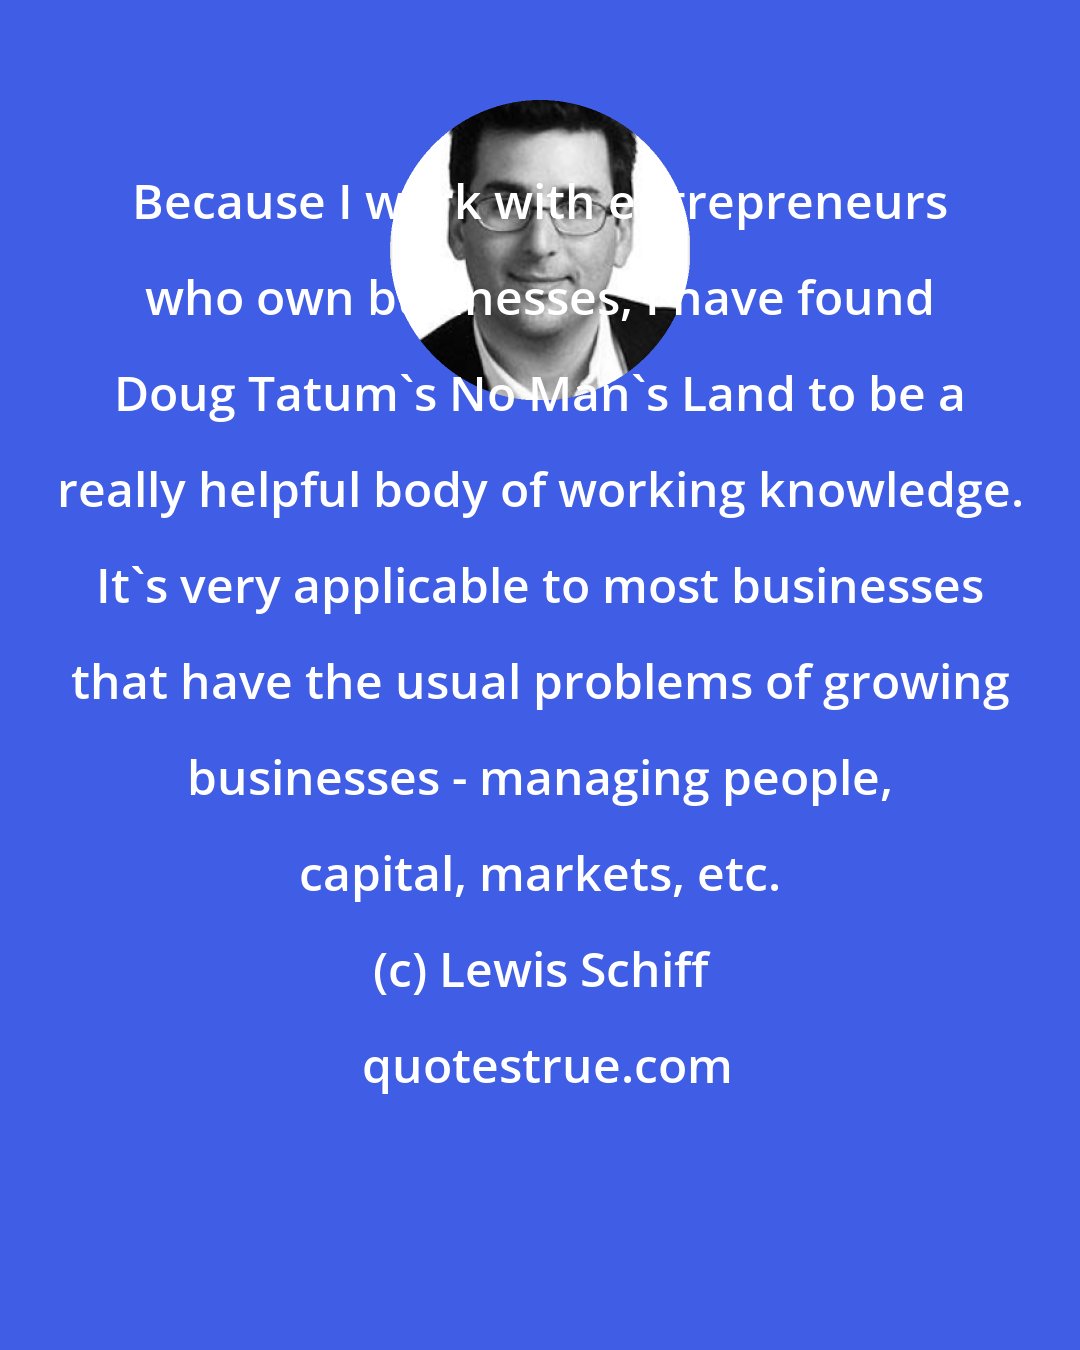 Lewis Schiff: Because I work with entrepreneurs who own businesses, I have found Doug Tatum's No Man's Land to be a really helpful body of working knowledge. It's very applicable to most businesses that have the usual problems of growing businesses - managing people, capital, markets, etc.